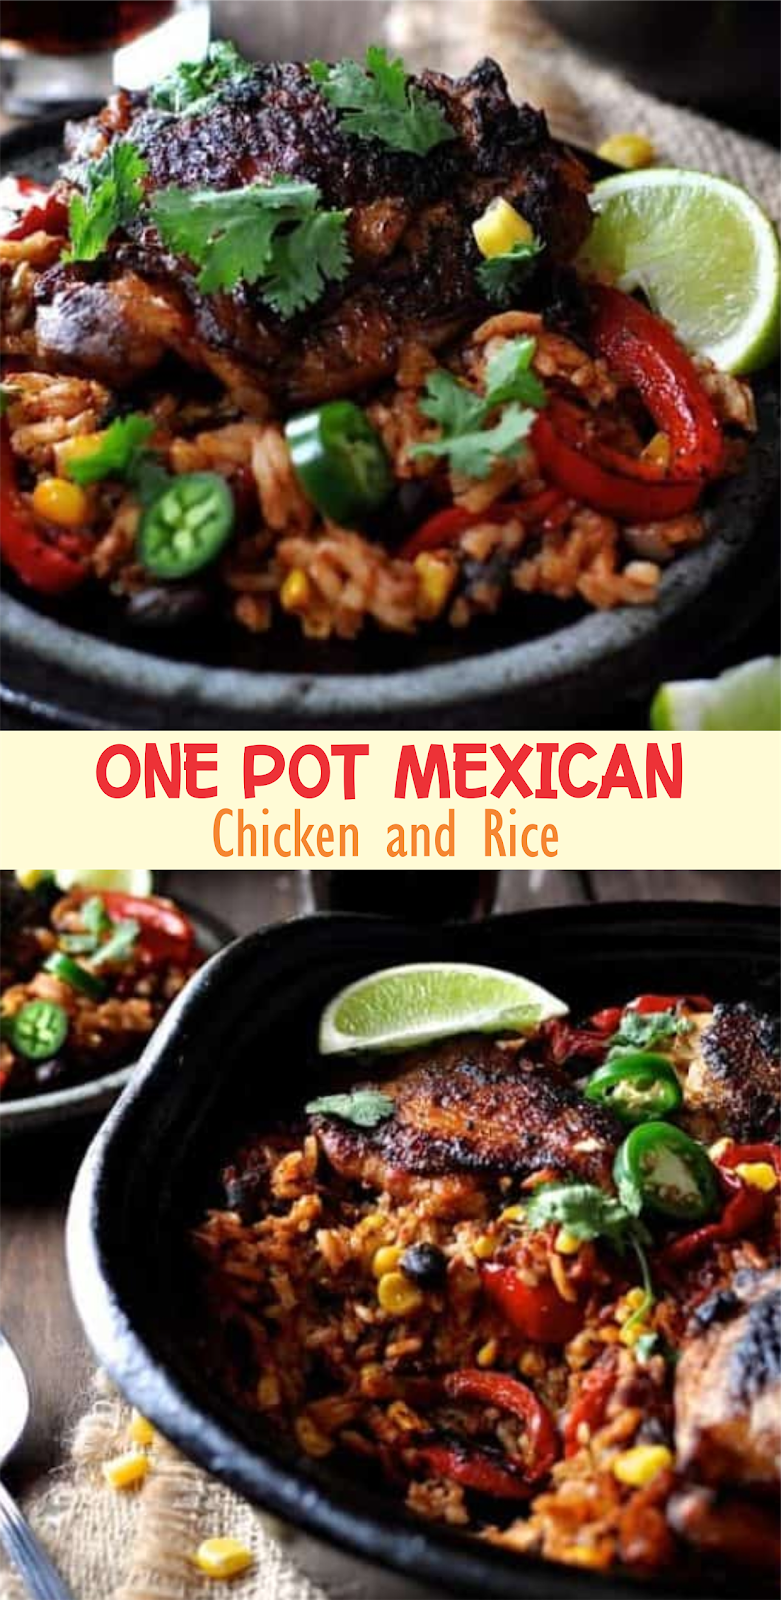 One Pot Mexican Chicken and Rice | EAT